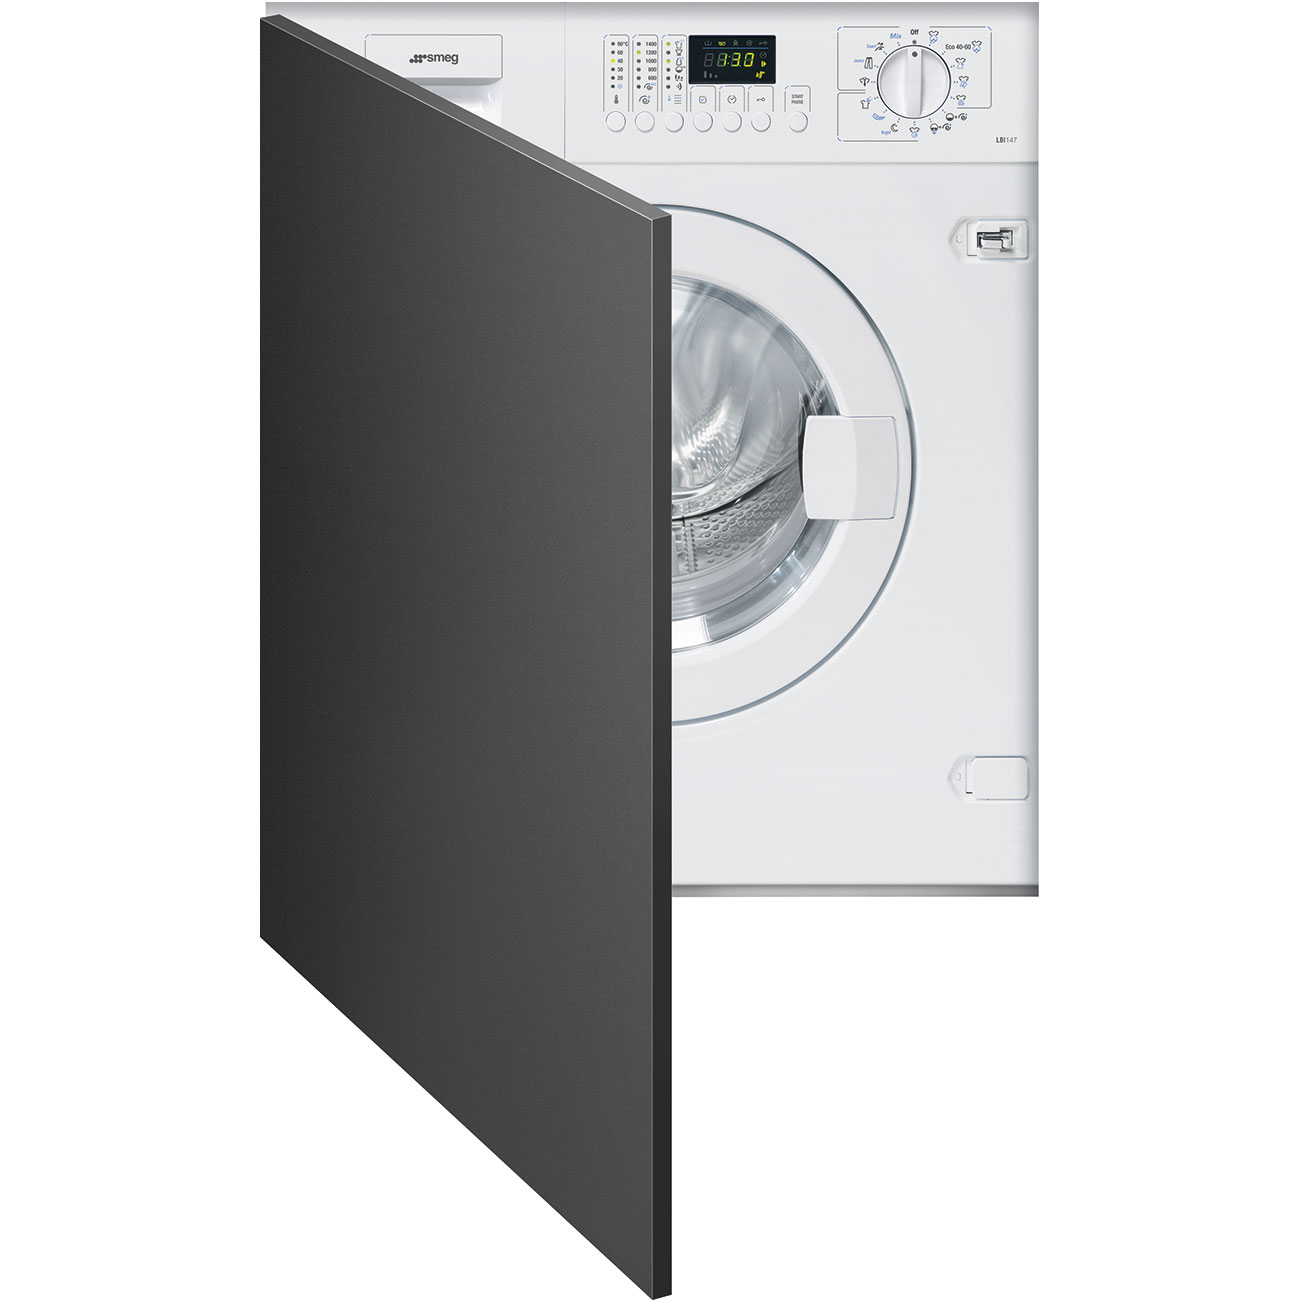 7 kg Fully integrated built-in washing machine Smeg_1